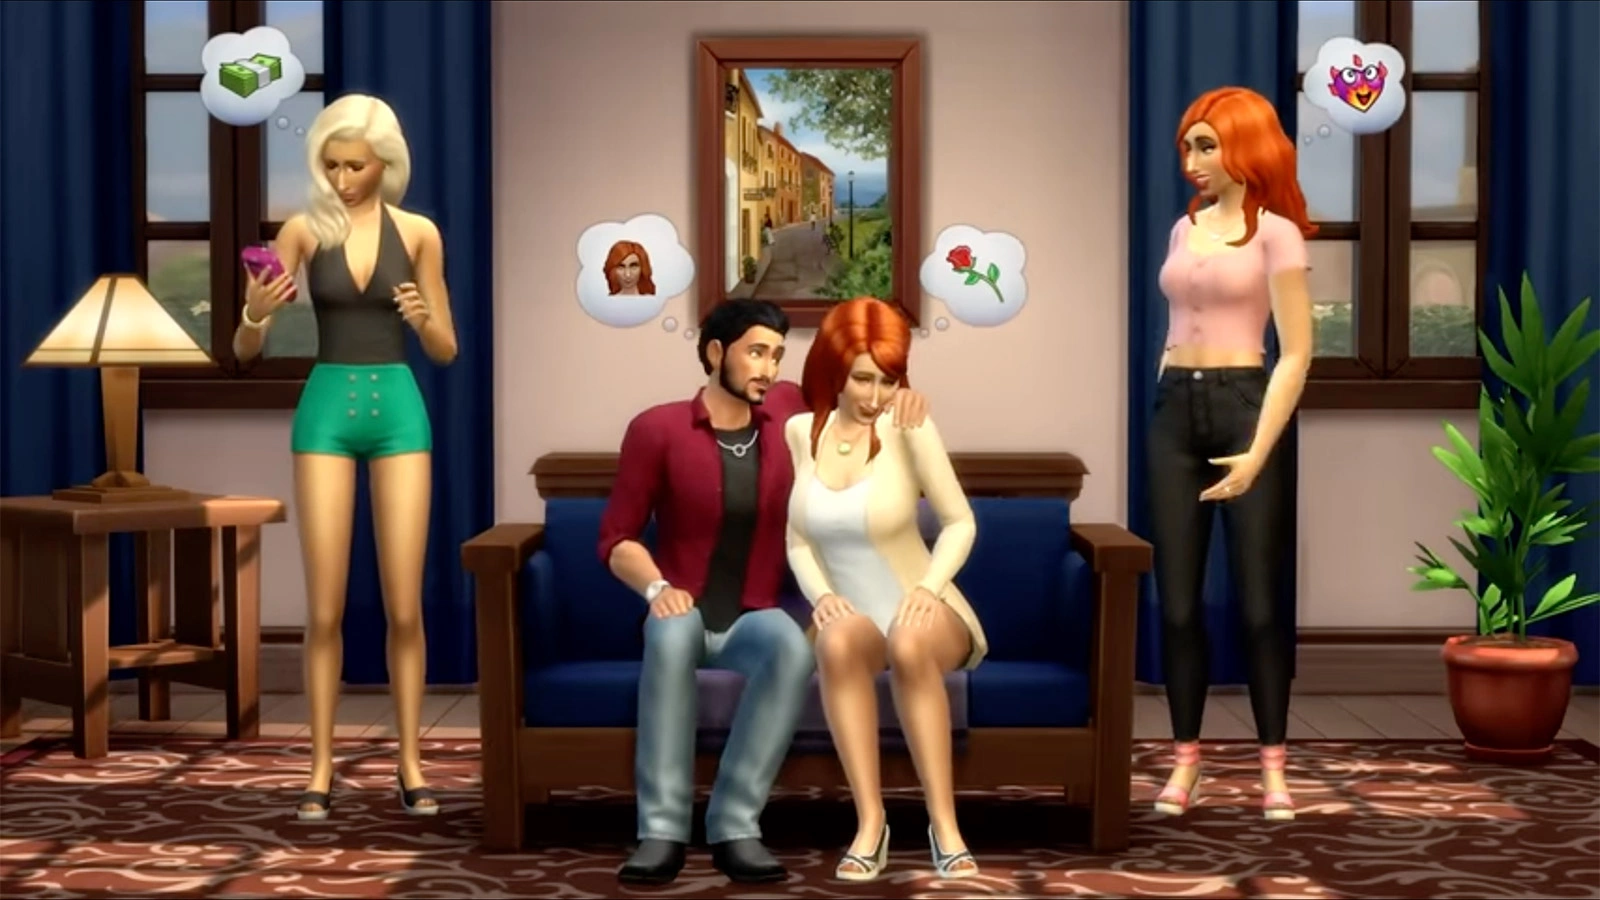 The Sims / YouTube